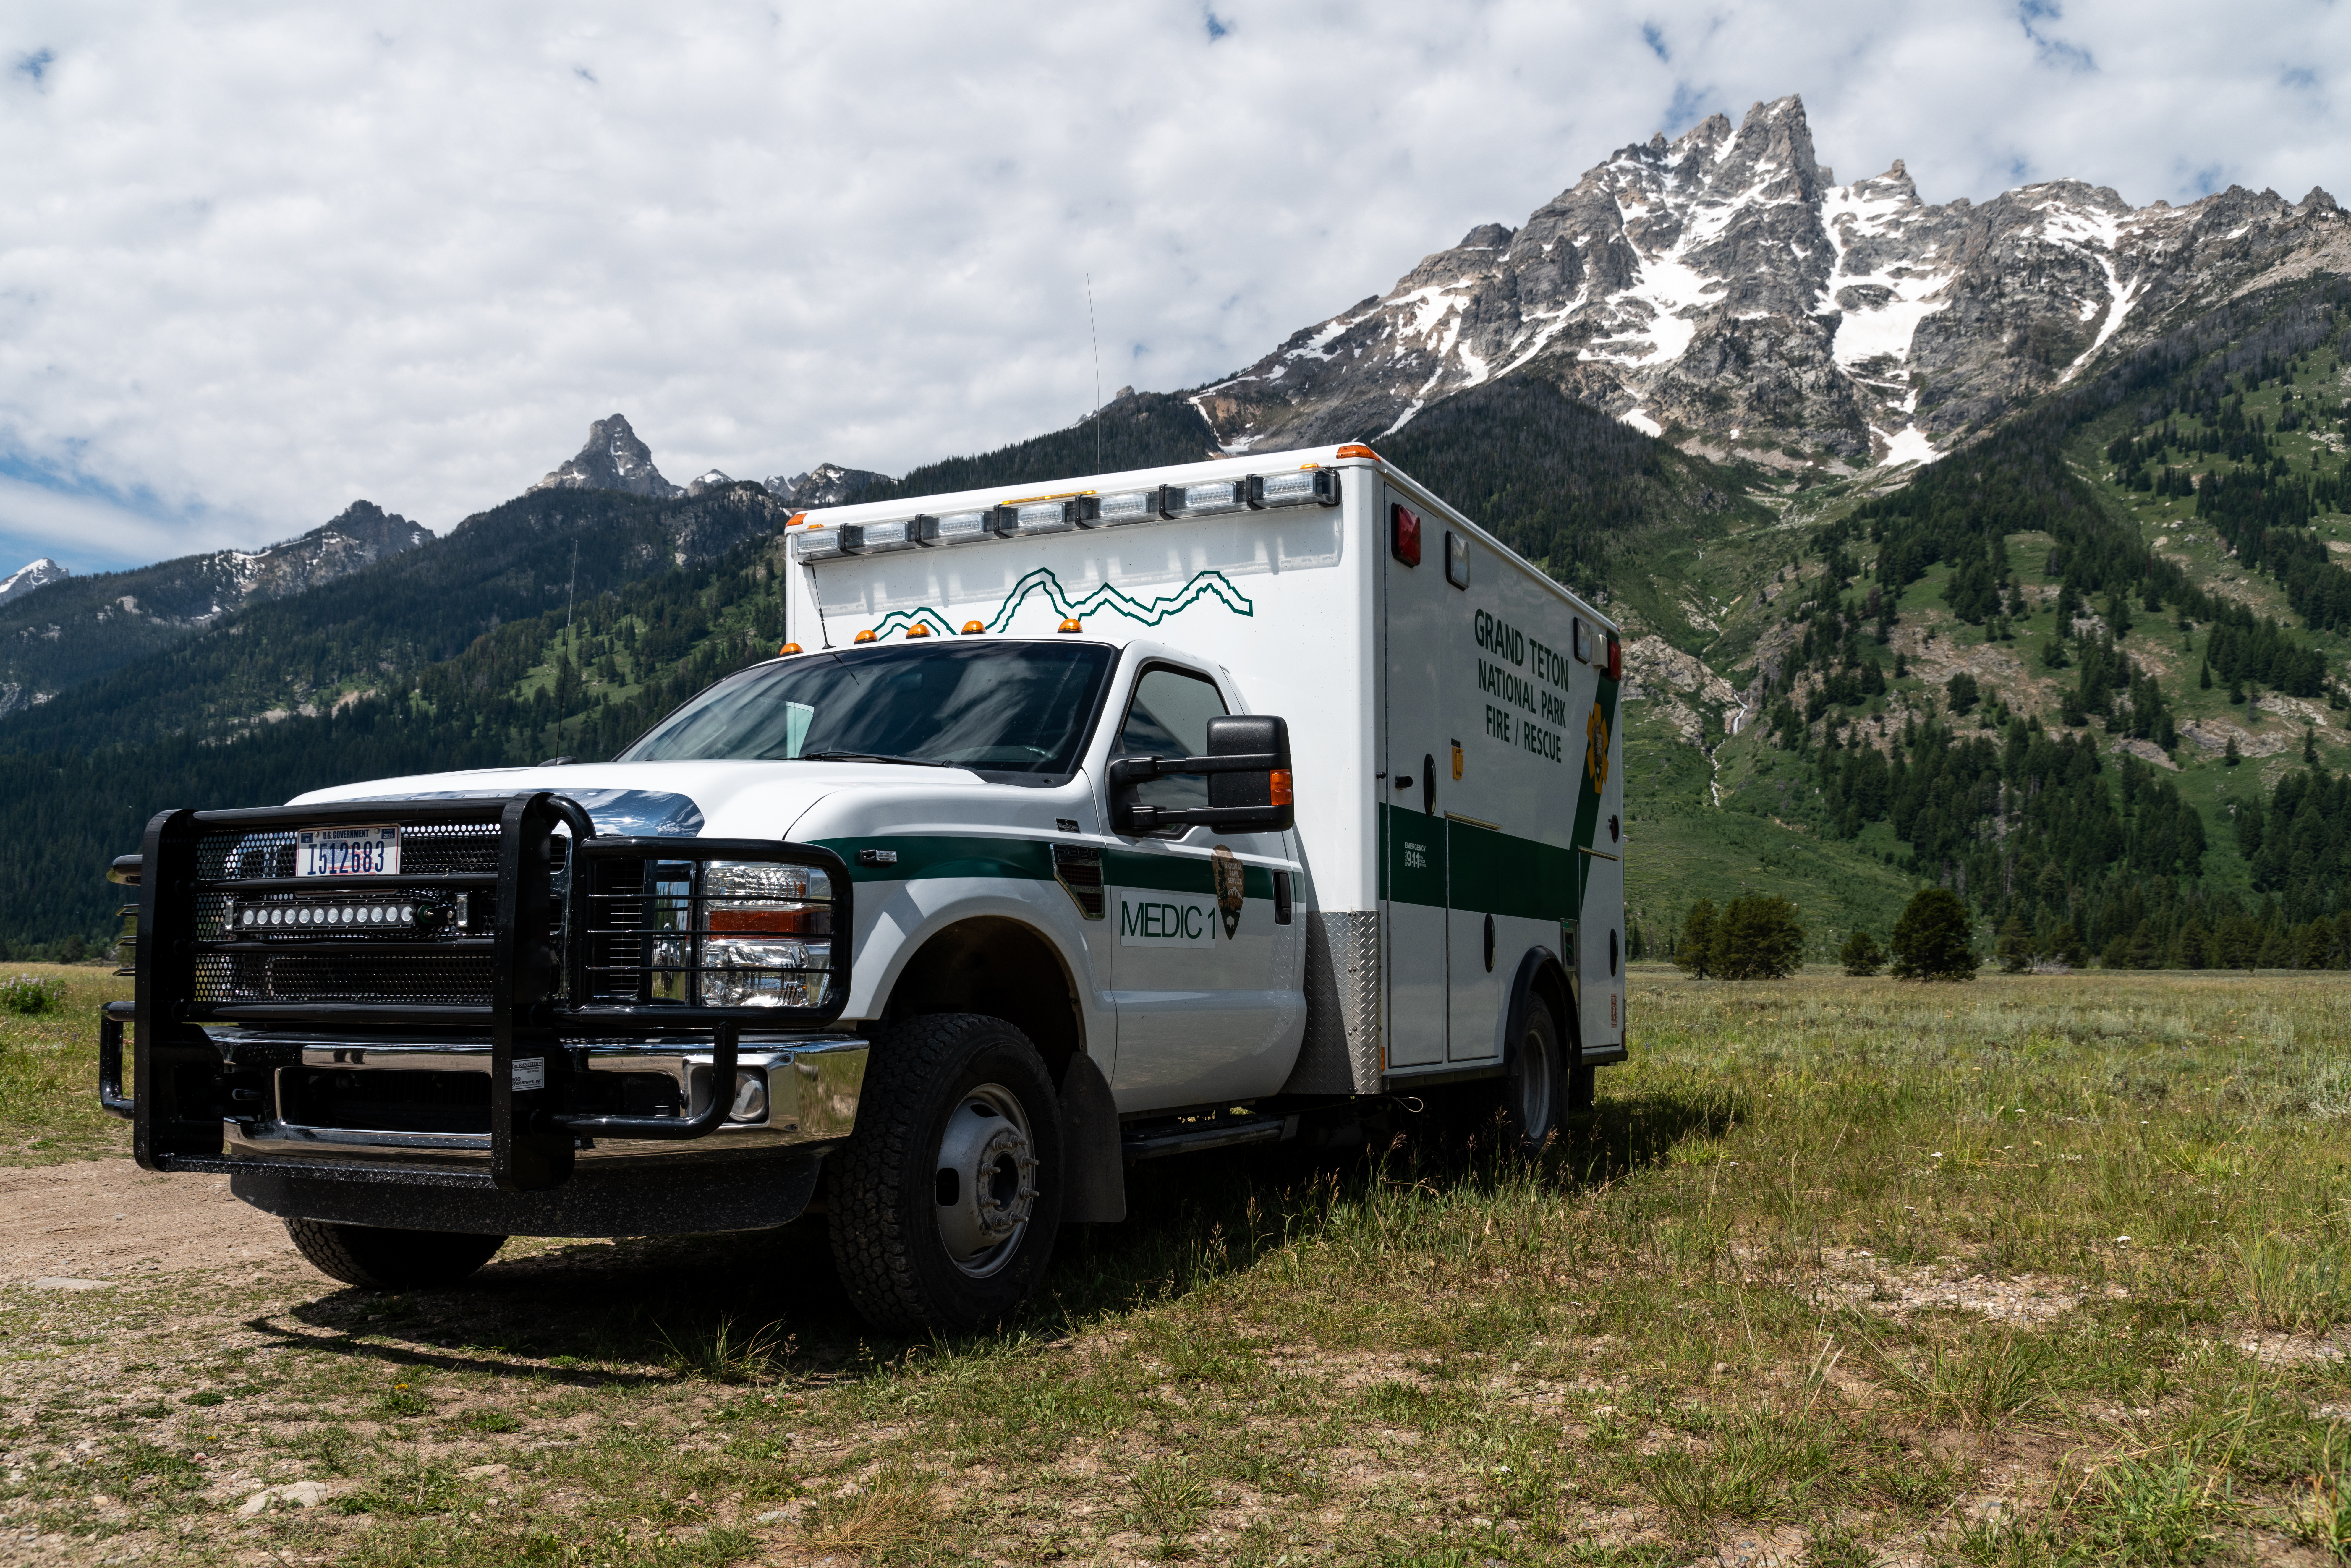 Ambulance in front of Mount Teewinot at the Jenny Lake Ranger SAR Cache